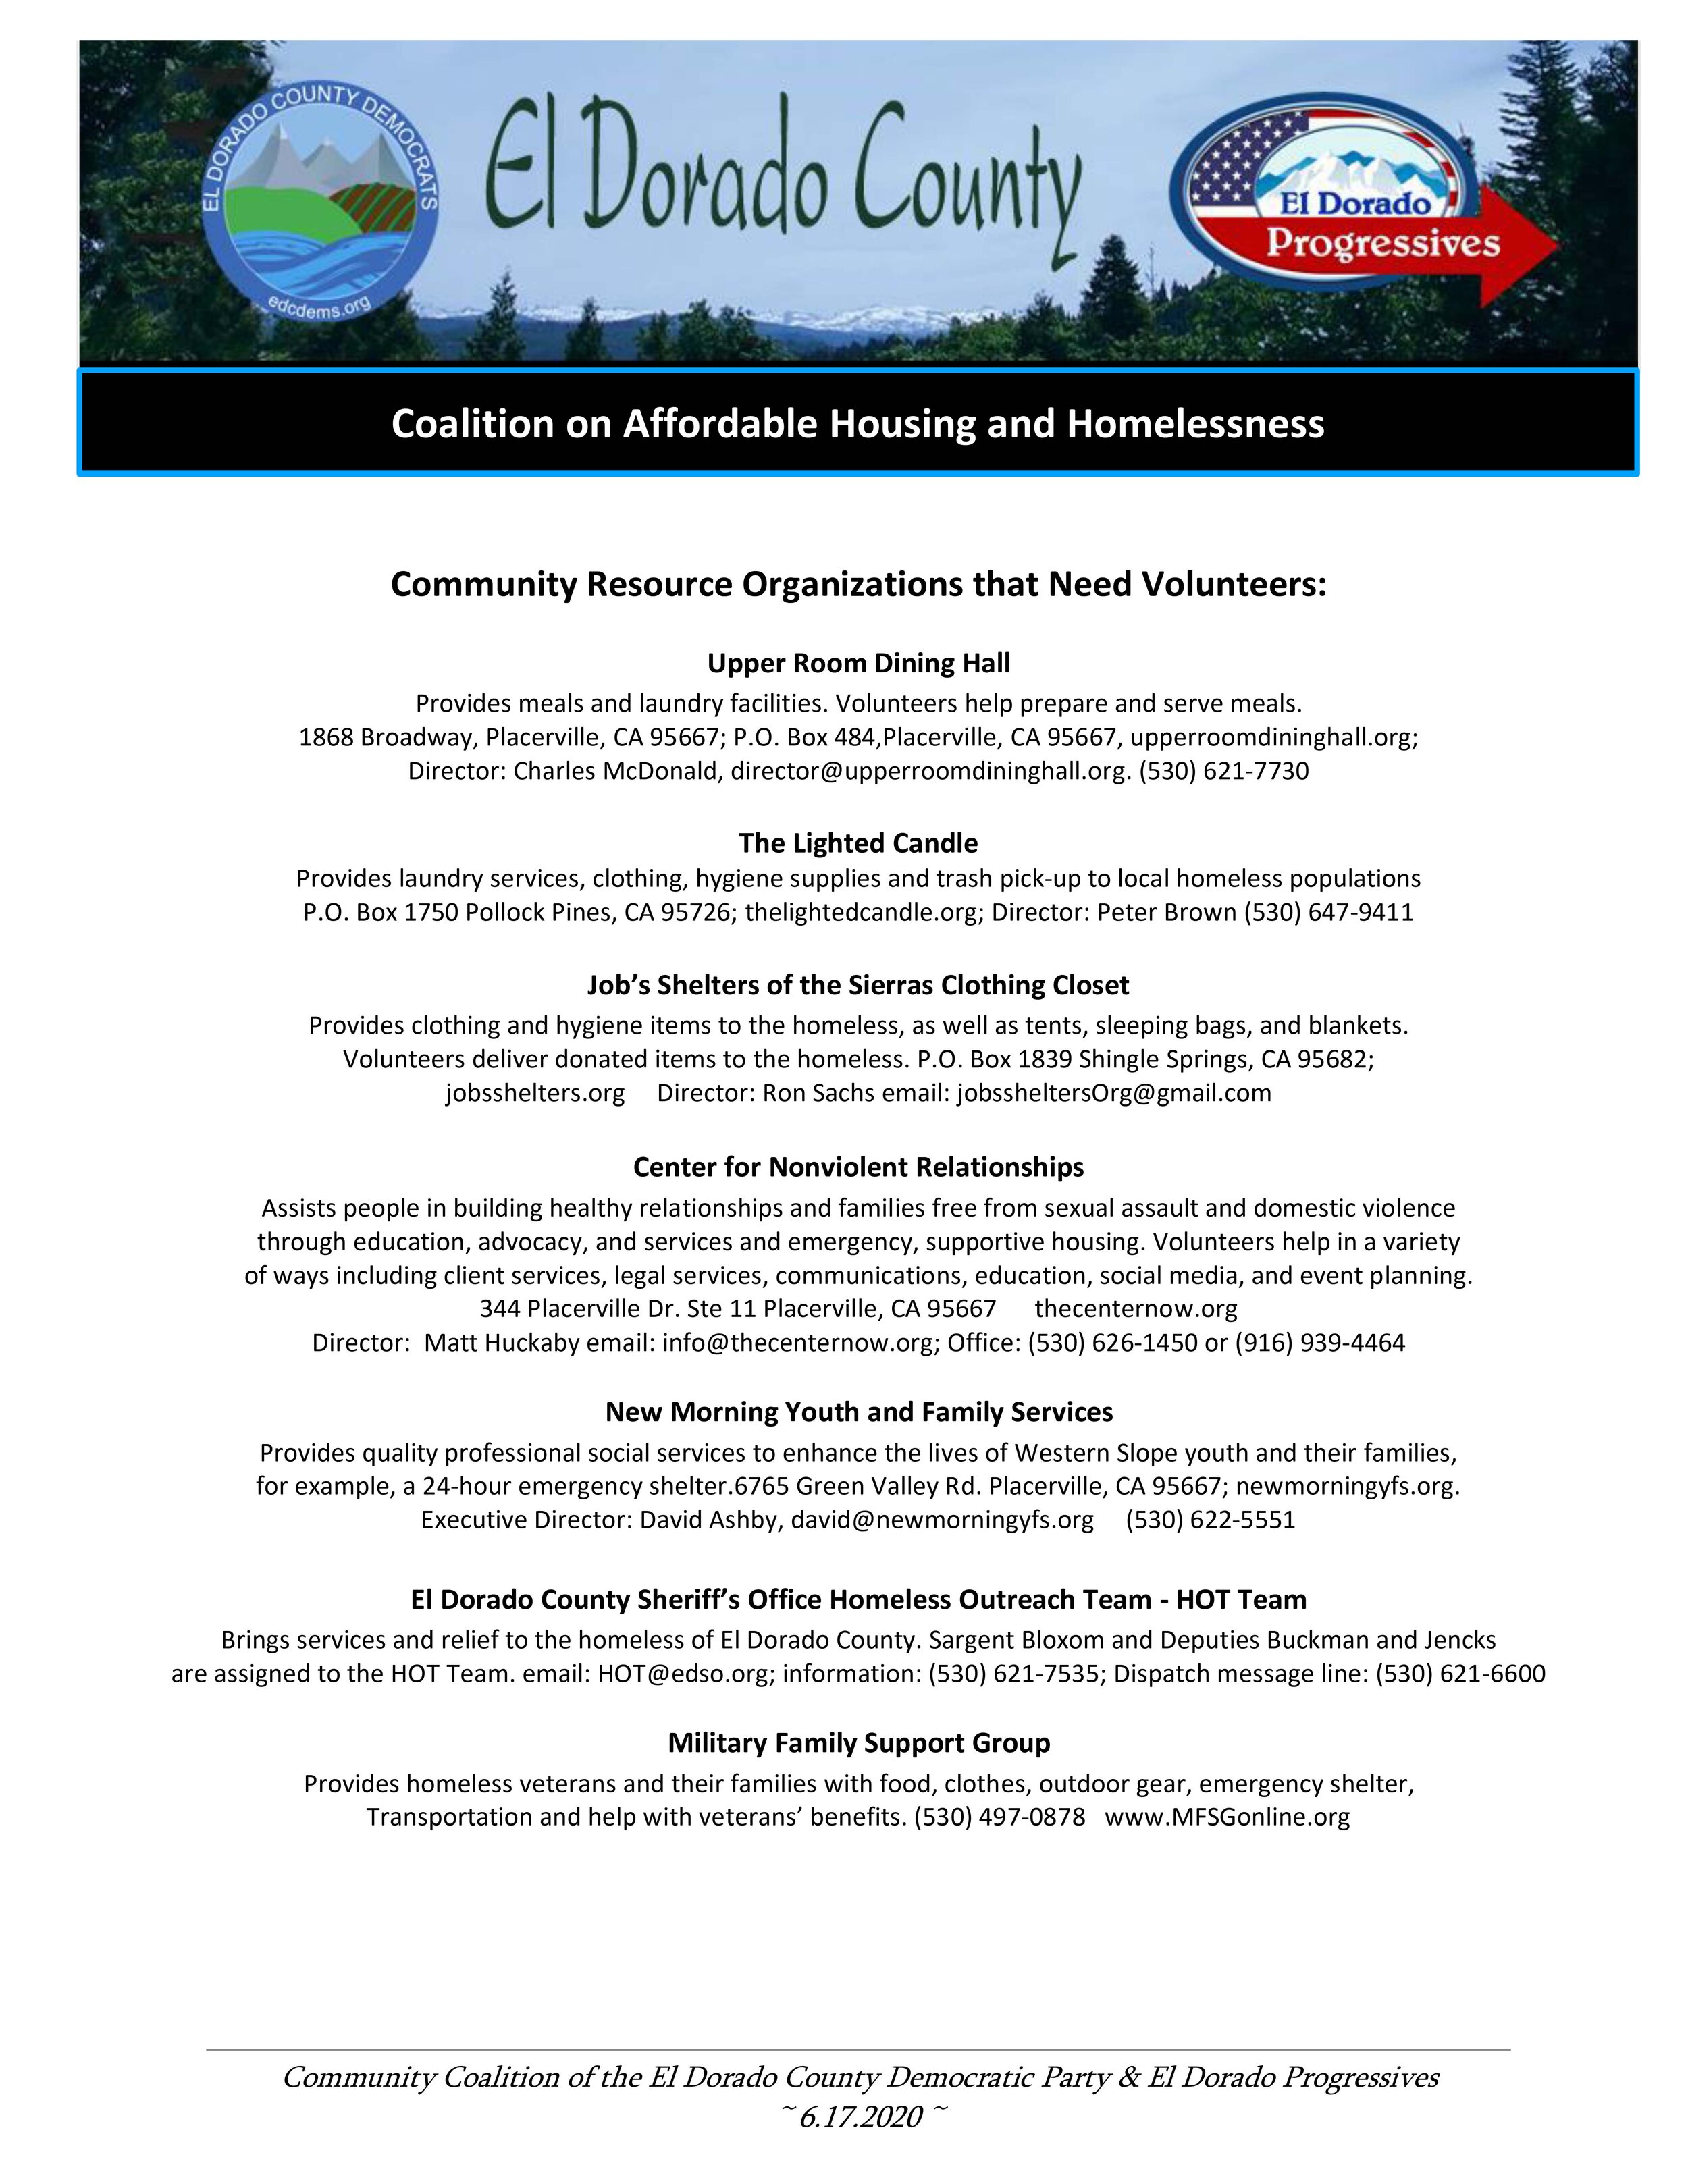 Flyer Affordable Housing Homelessness & resources 6.18.2020-2.jpg